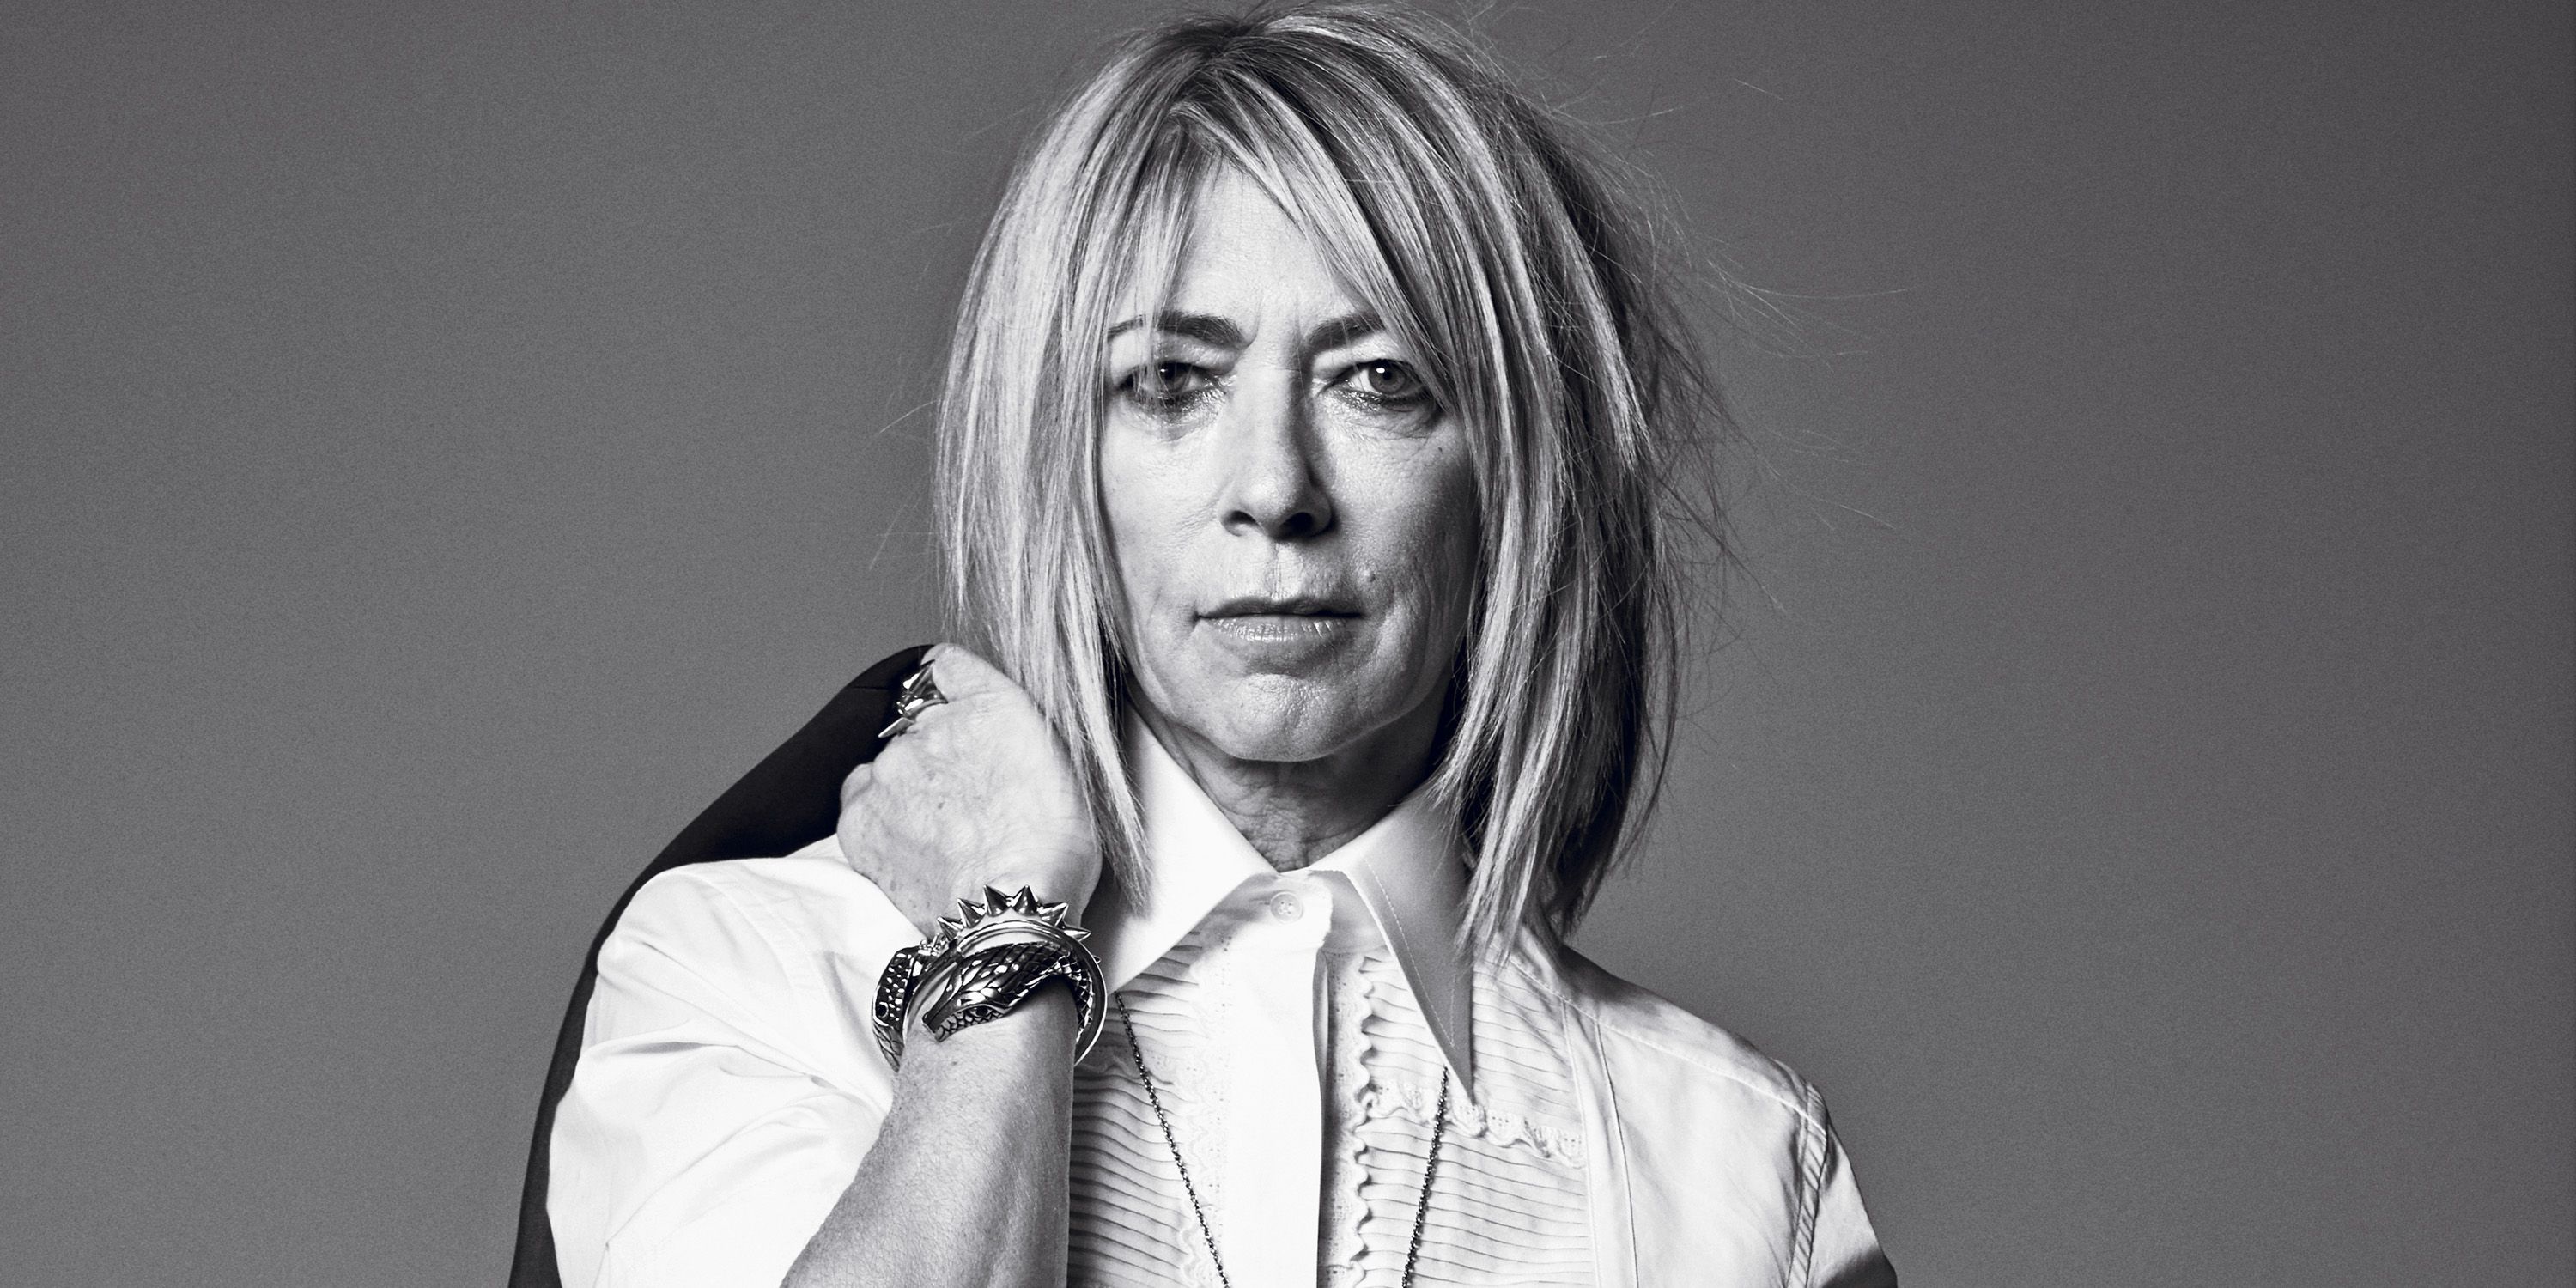 Kim Gordon’s daring debut may go over the heads of some listeners